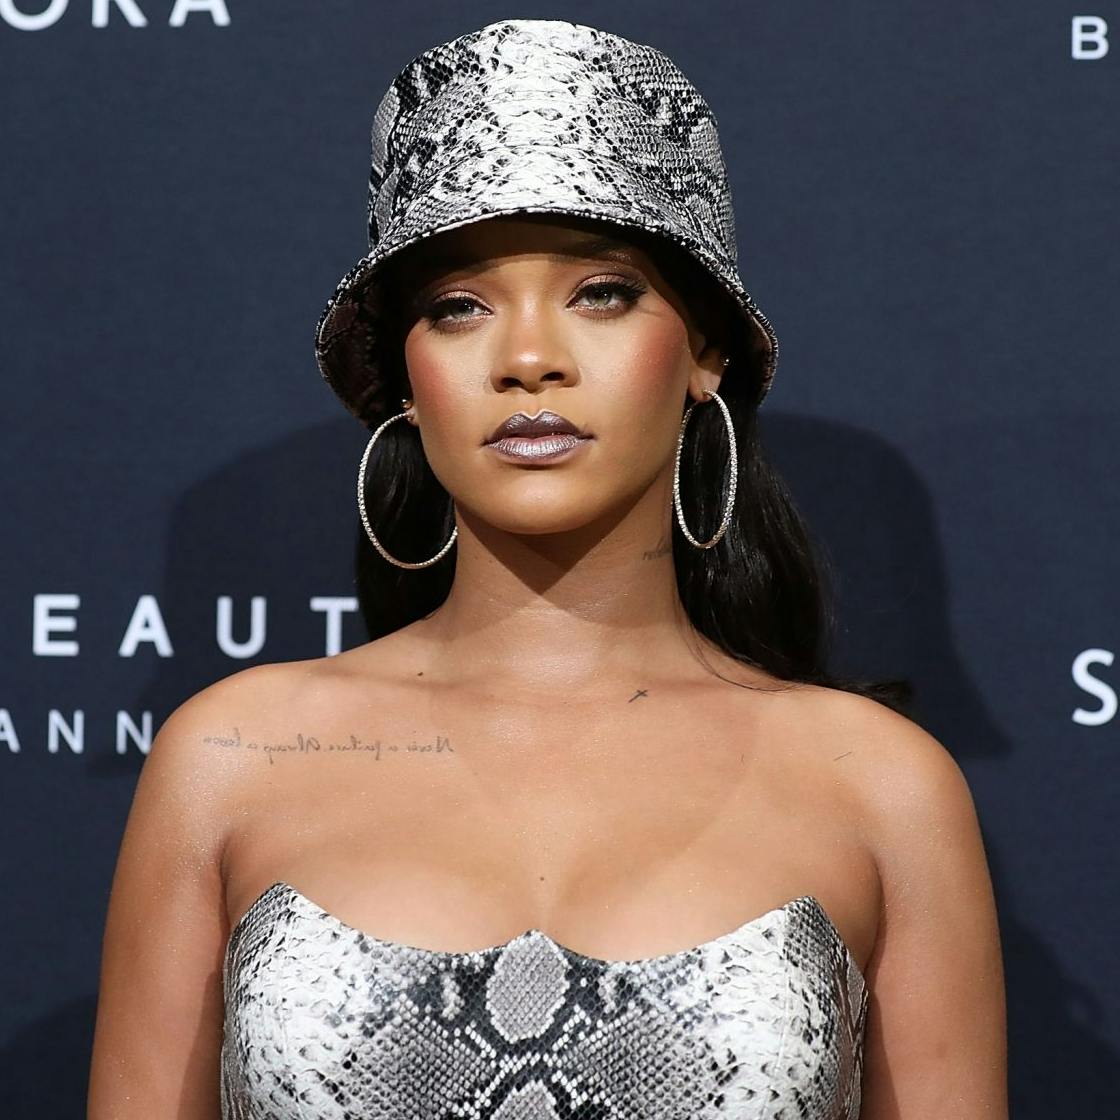 LVMH announces the fast approaching launch of a new luxury Maison,  developed by Robyn Rihanna Fenty - LVMH